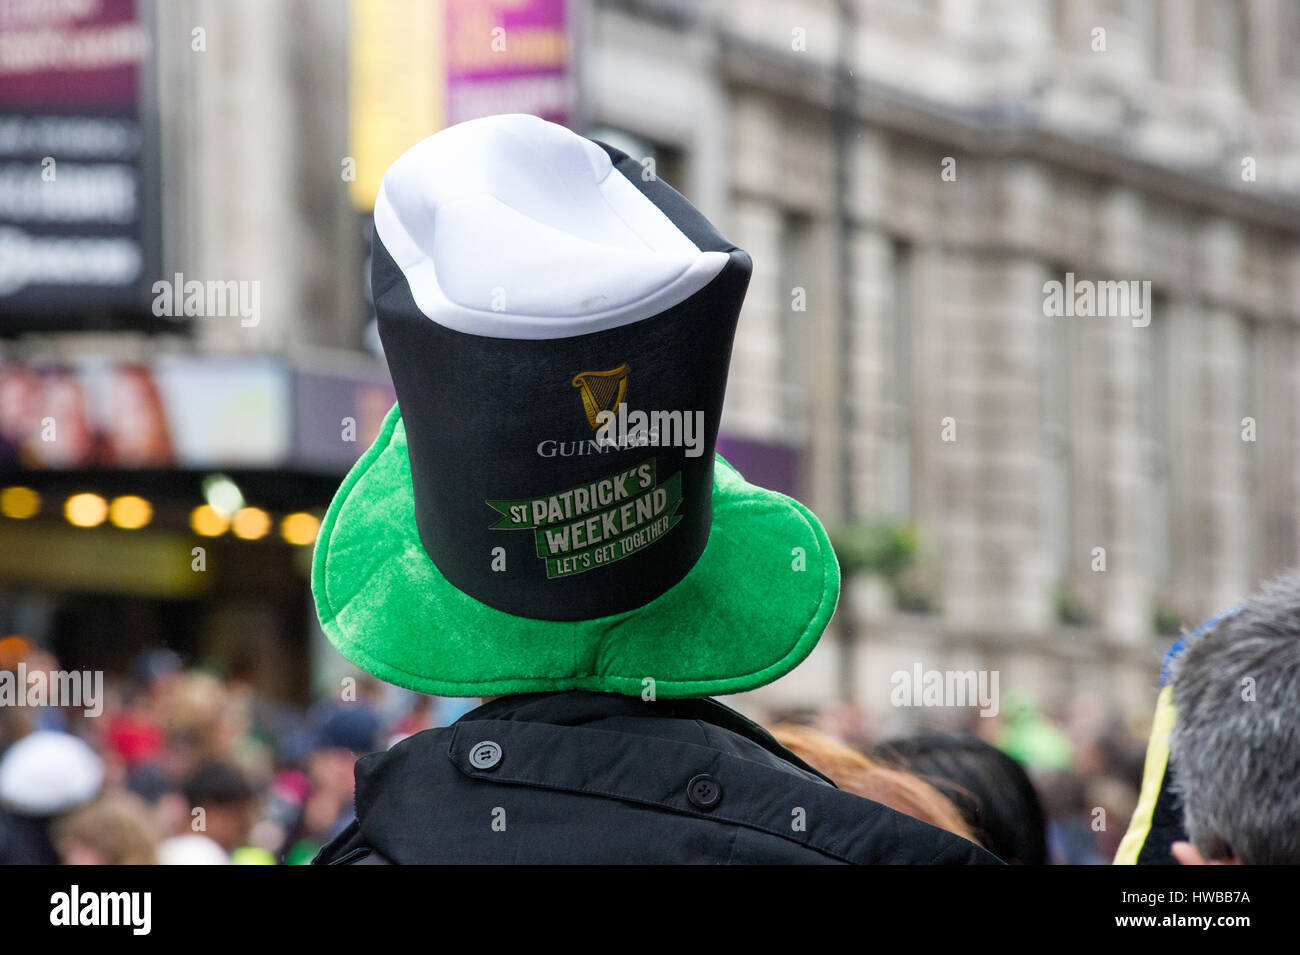 London, England, UK.  19th March 2017. The annual St Patrick's day parade through Central London and through Trafalgar Square, is the end of an official three-day celebration. The parade included various floats and acts along the way. Andrew Steven Graham/Alamy Live News Stock Photo